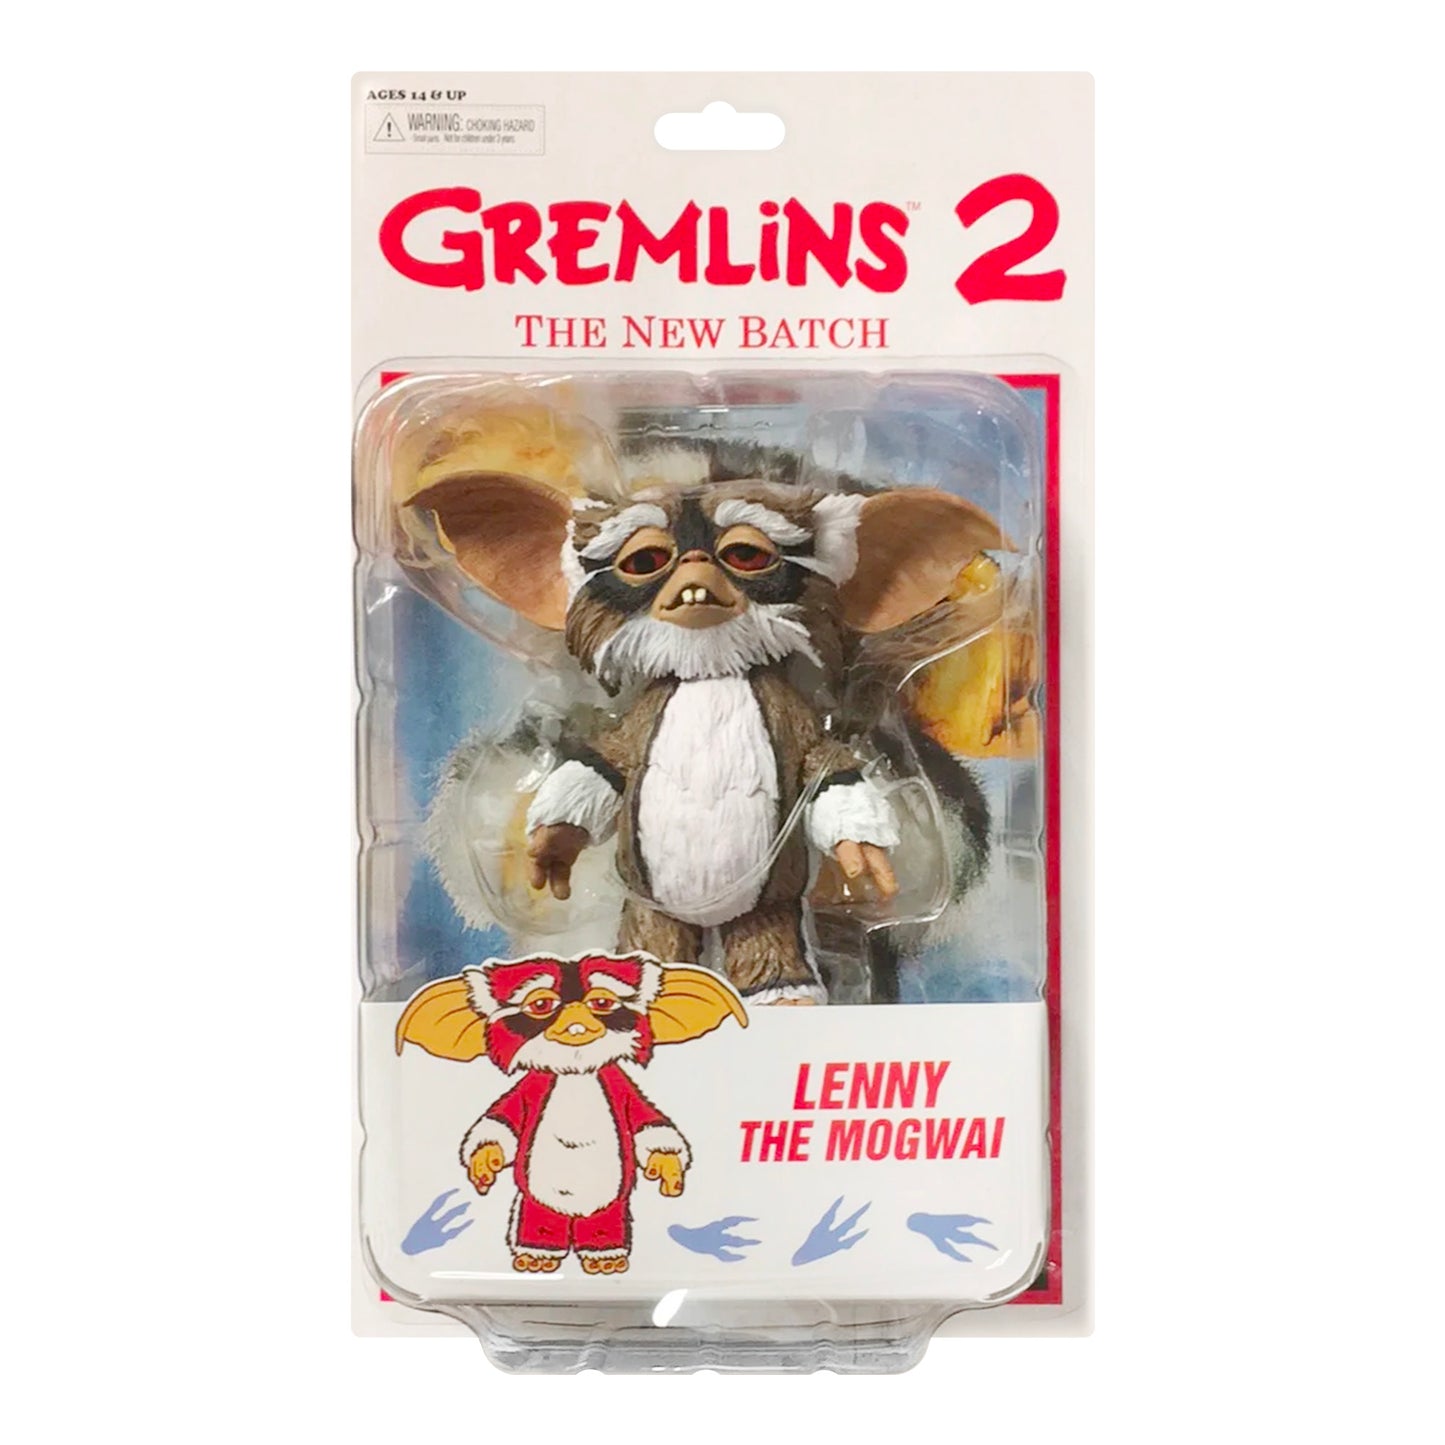 NECA: Gremlins 2 - Mogwais in Blister Card 7" Tall Action Figure